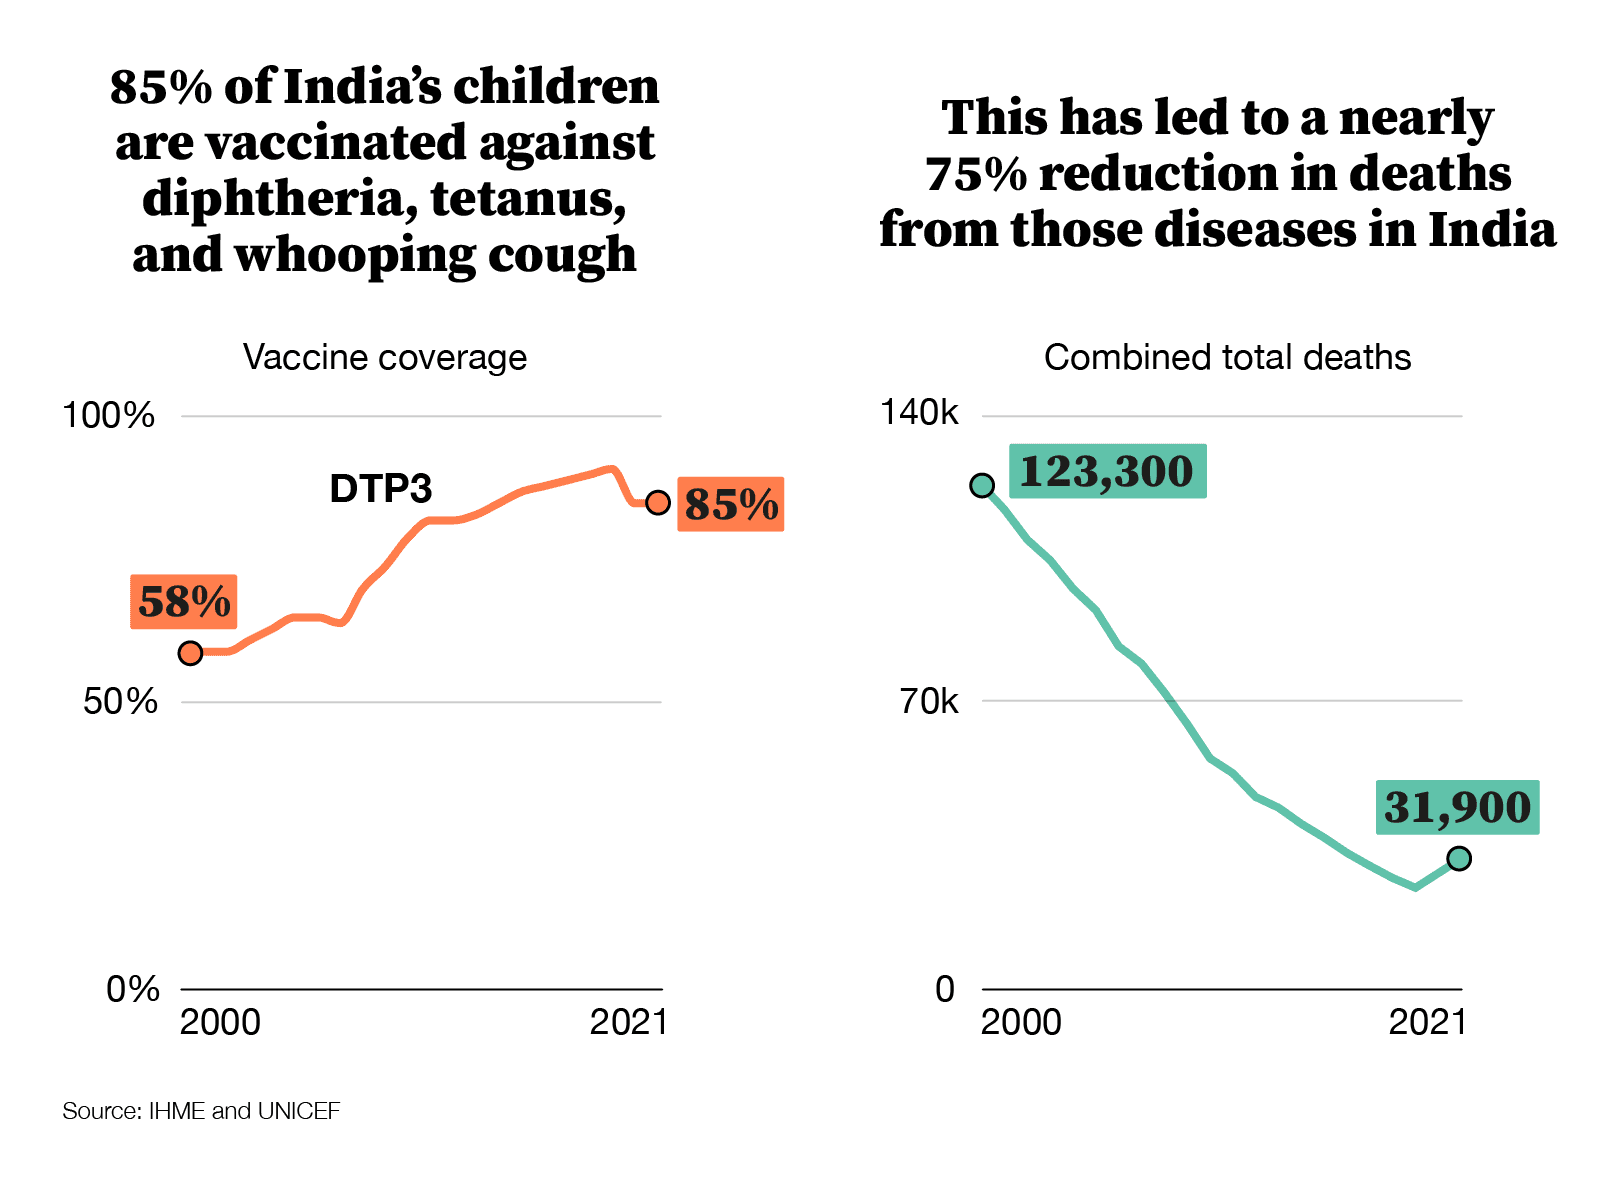 85% of India's children are vaccinated again diptheria, tetanus, and whooping cough. This as led to a nearly 75% reduction in deaths from those diseases in India.